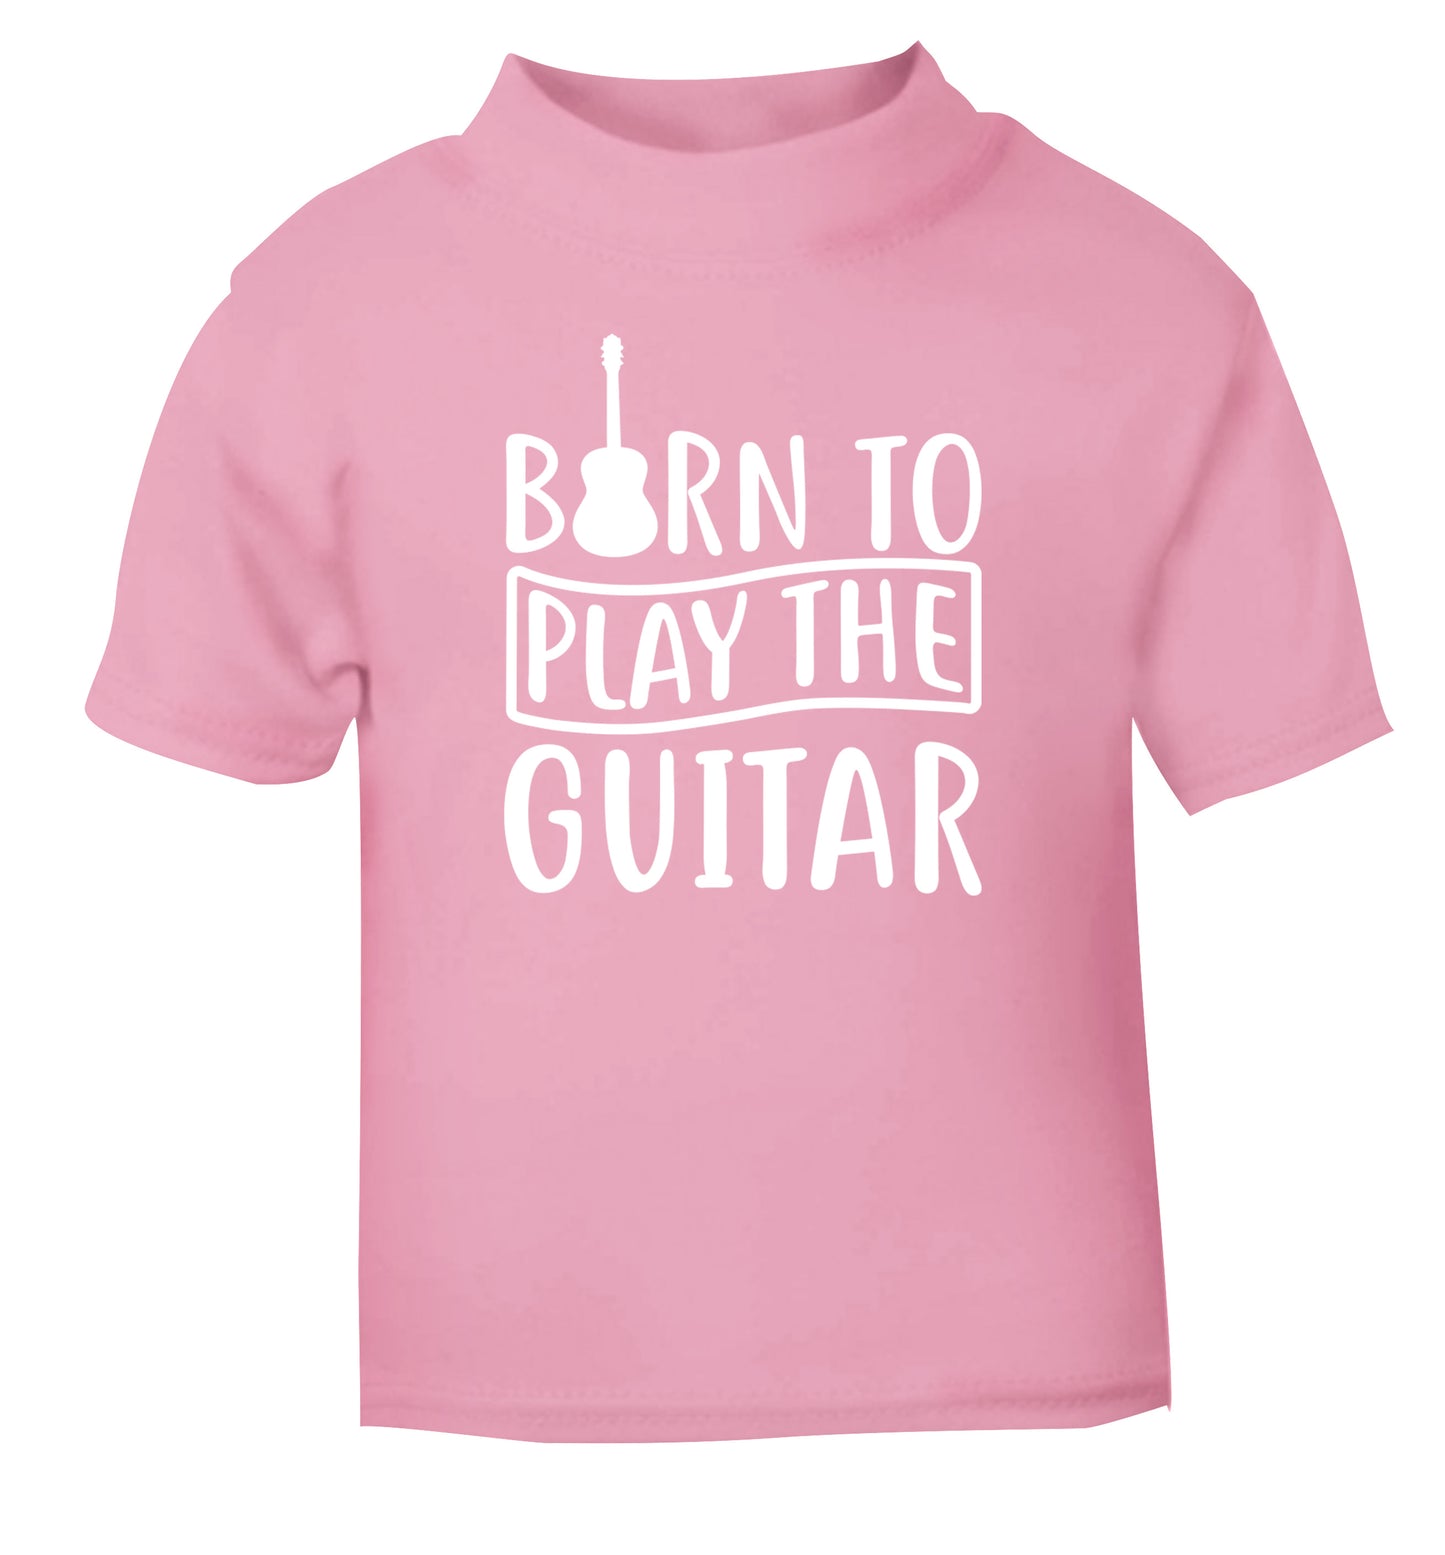 Born to play the guitar light pink Baby Toddler Tshirt 2 Years